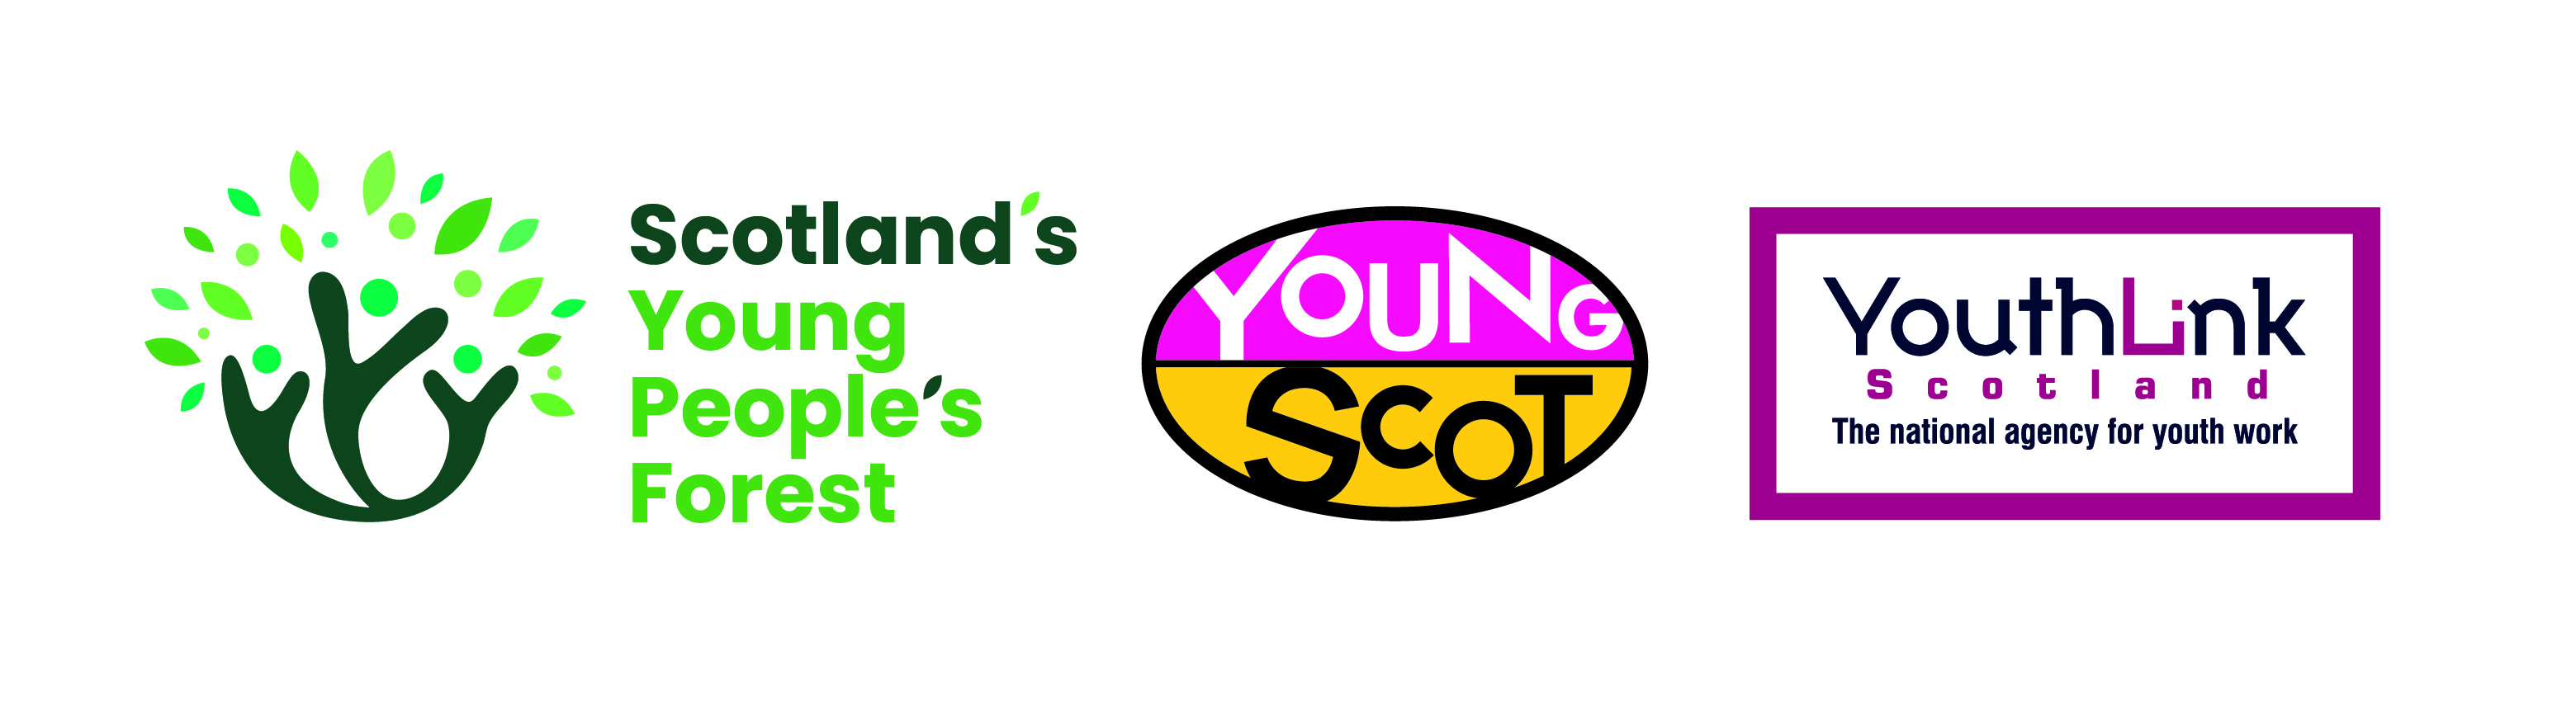 Logo of Scotland's Young People's Forest, the logo for Young scot and the logo for Youth Link